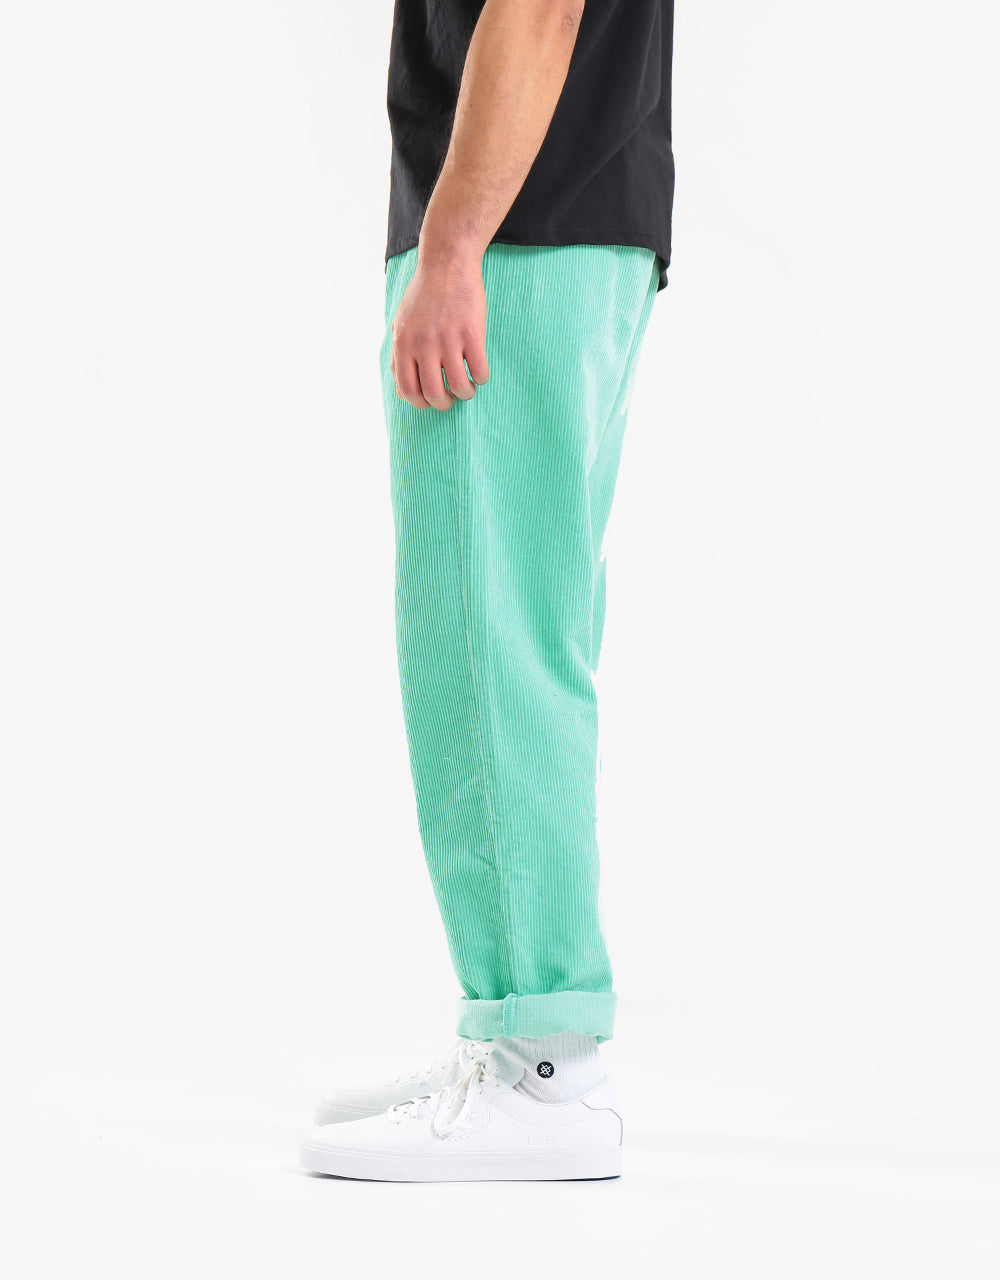 Route One Relaxed Fit Big Wale Cords - Quiet Wave